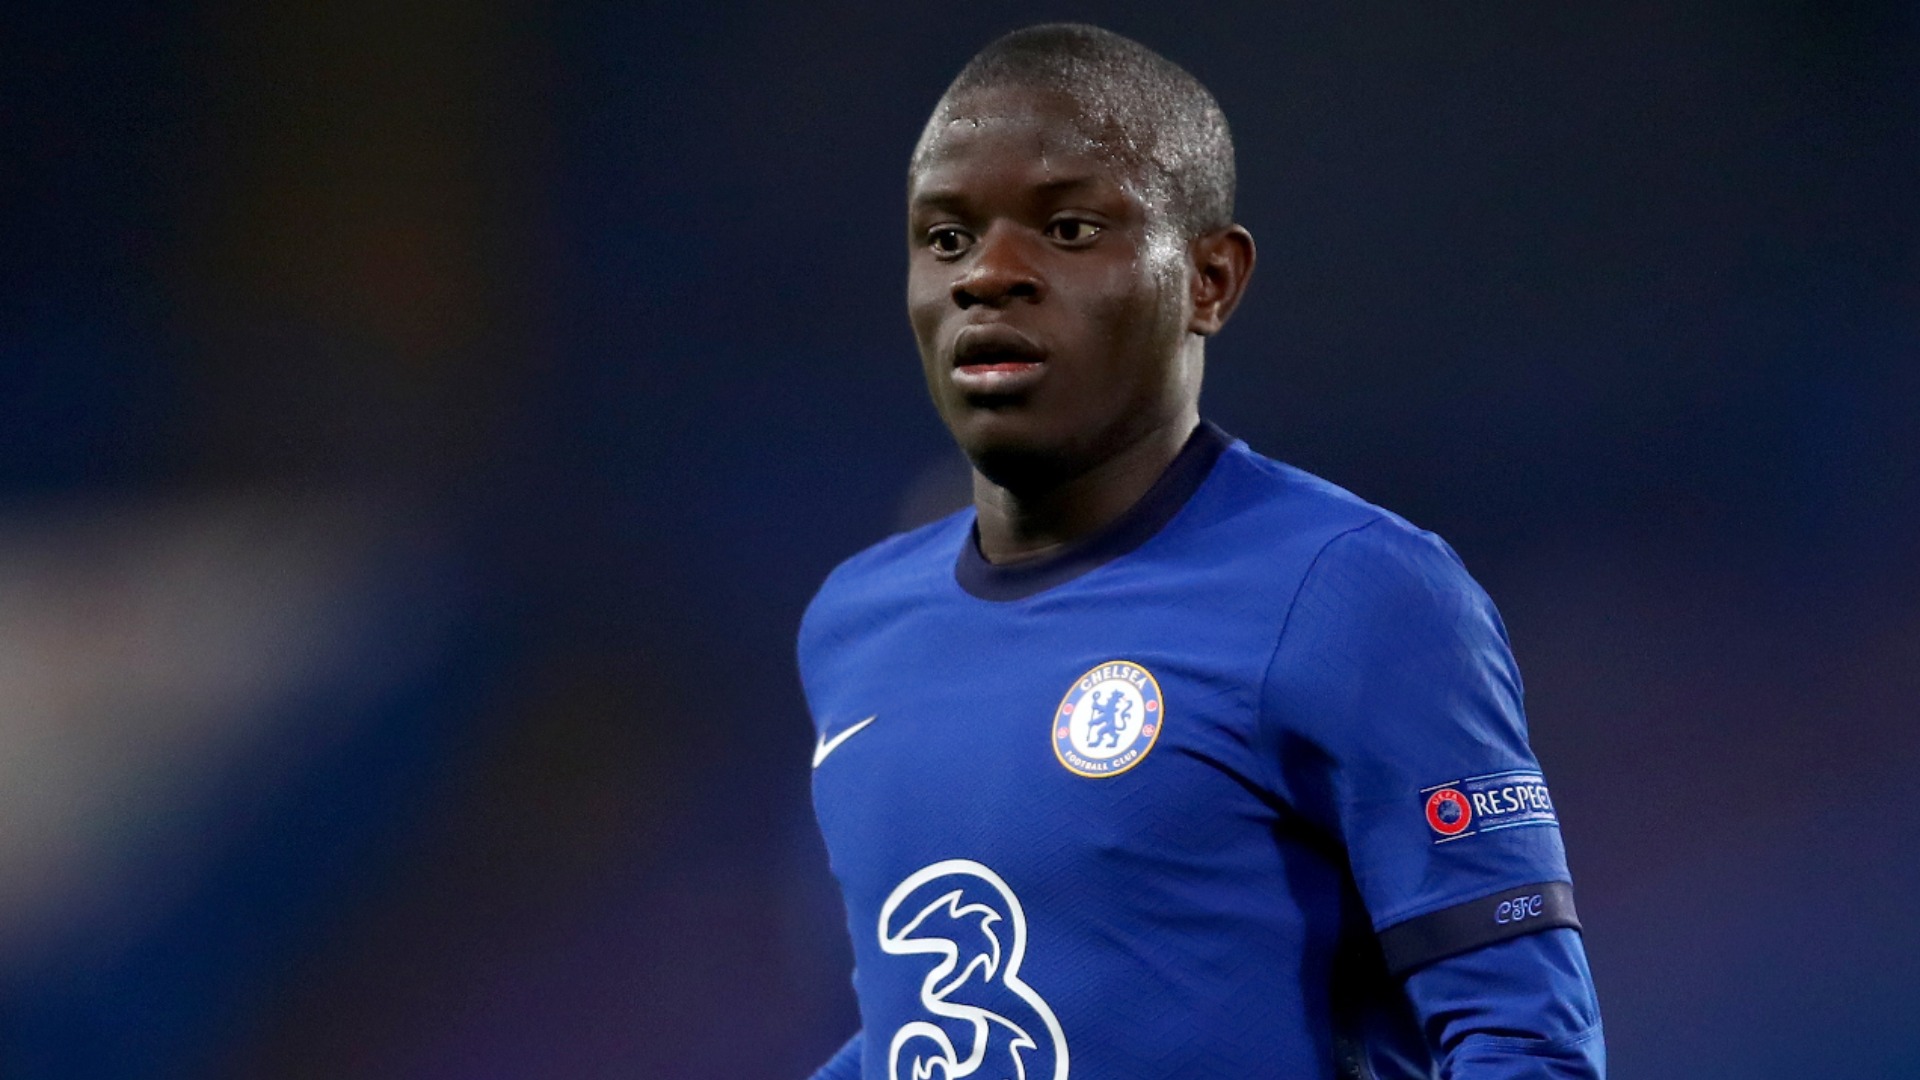 N'Golo Kante has recovered some of his very best form for Chelsea after moving back to the heart of the side under Frank Lampard.